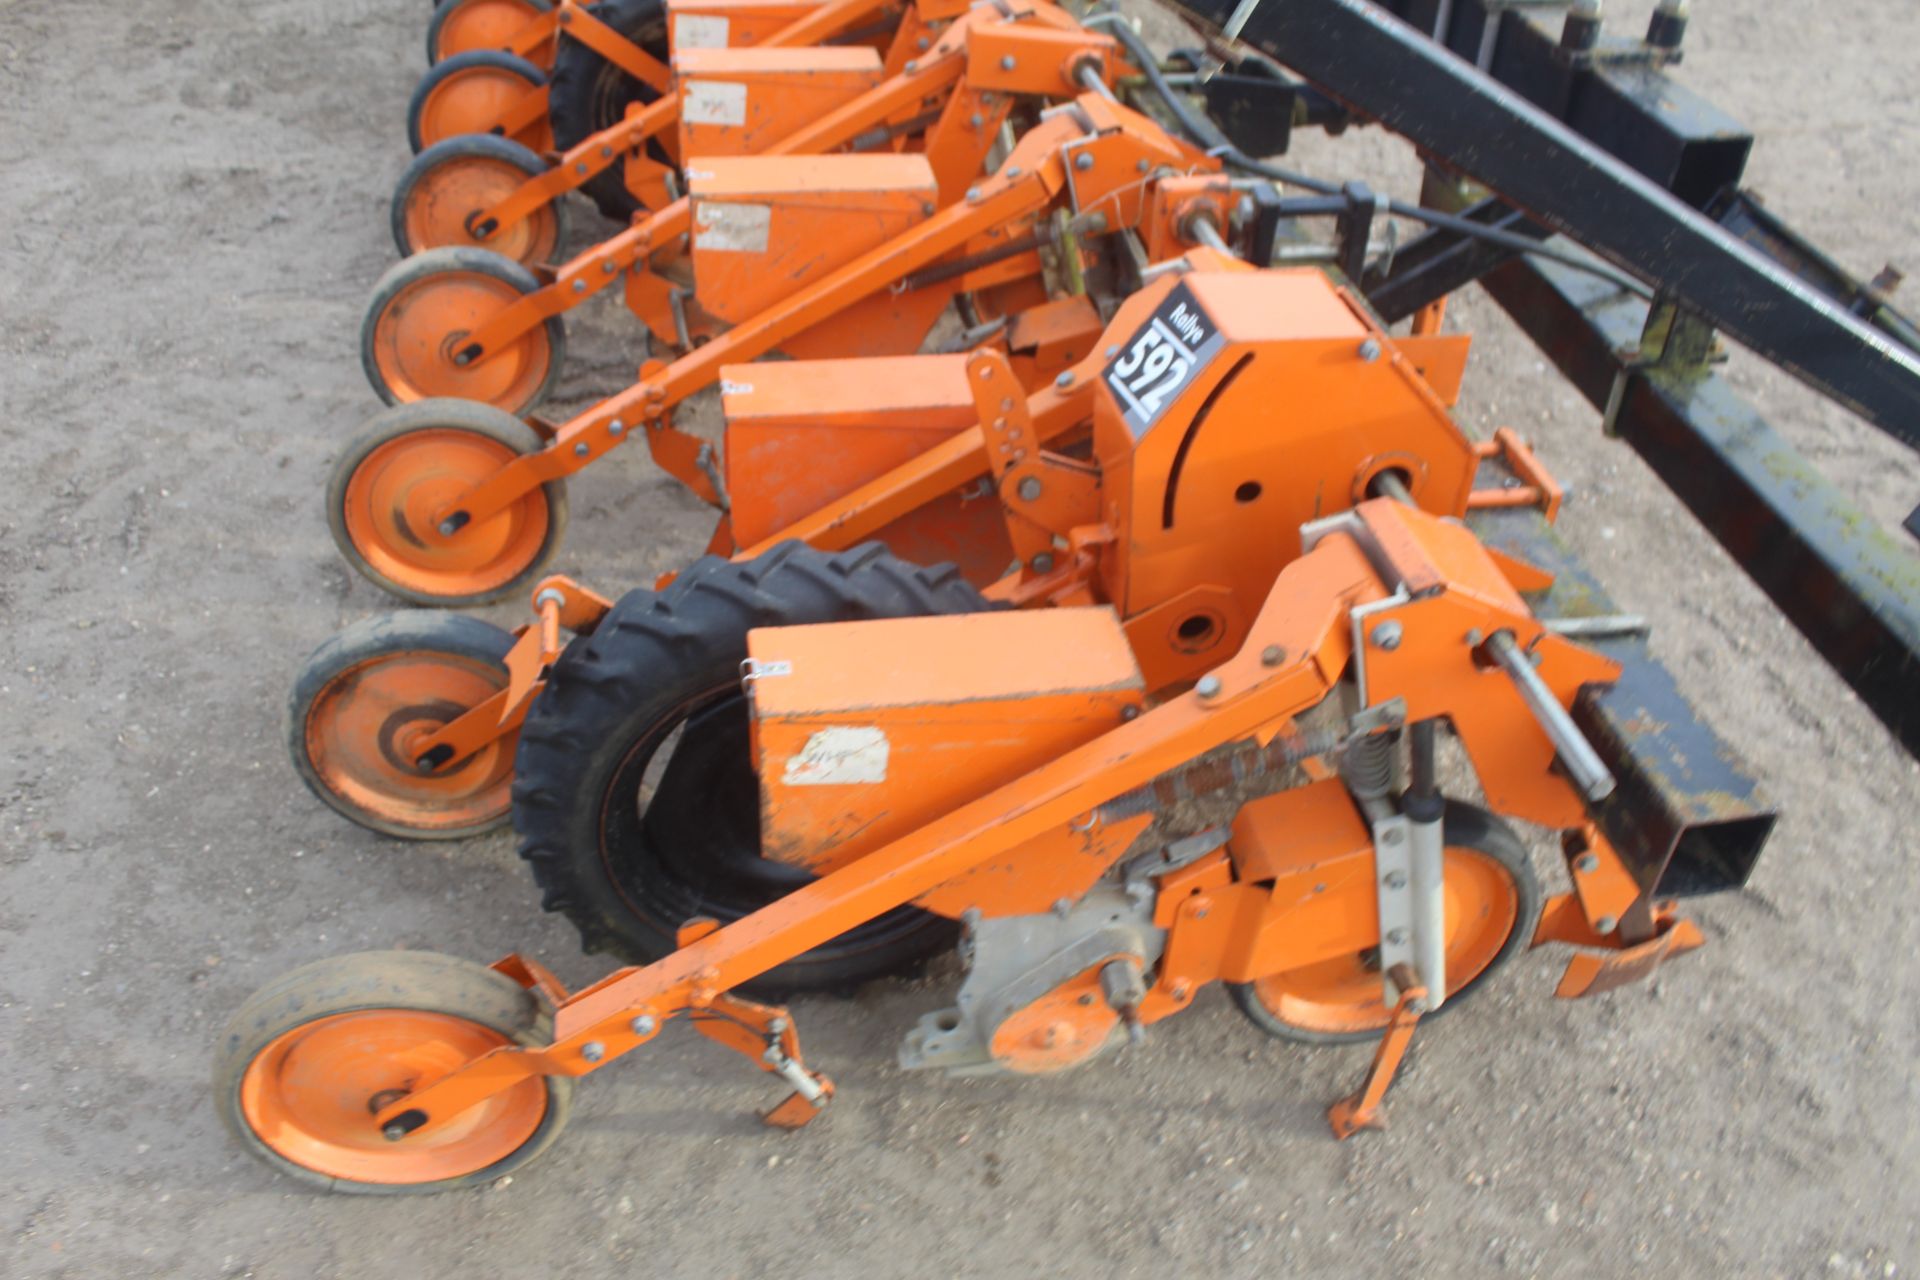 Stanhay Rallye 592 hdraulic folding 12 row beet drill. With bout markers. For spares or repair. V - Bild 22 aus 26